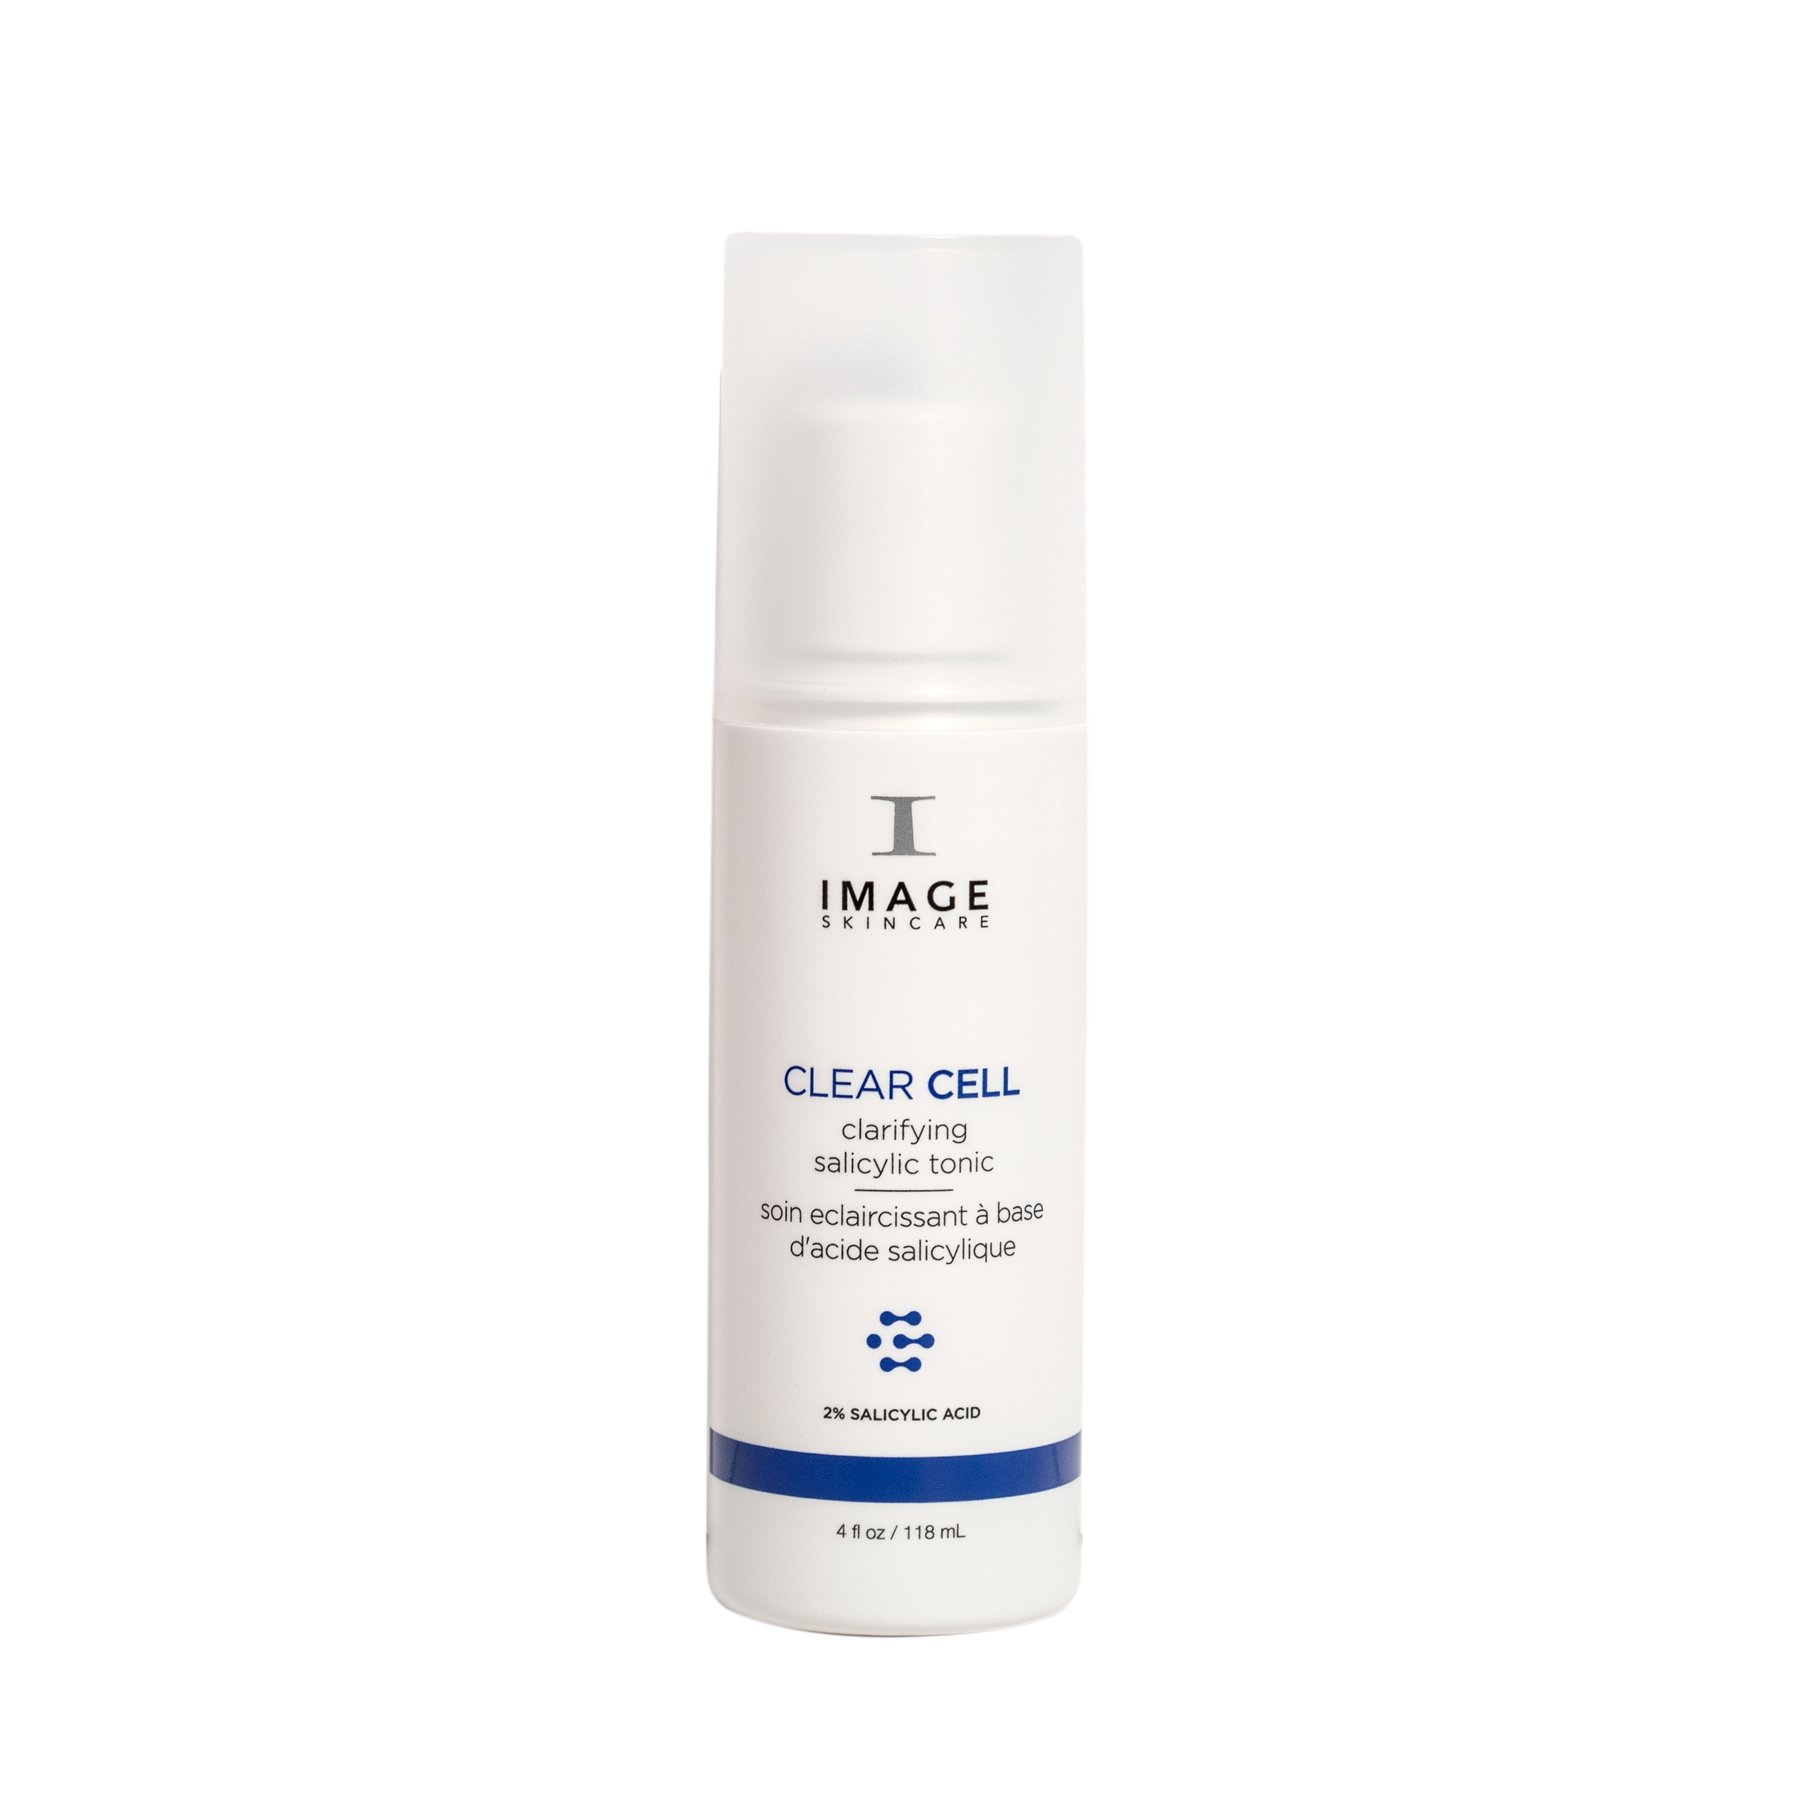 Image Vital c Hydrating Cleanser 177ml. Clear Cell Salicylic Gel Cleanser. Mad Salicylic Cleansing Gel. Clear Cell image набор. Clear cell